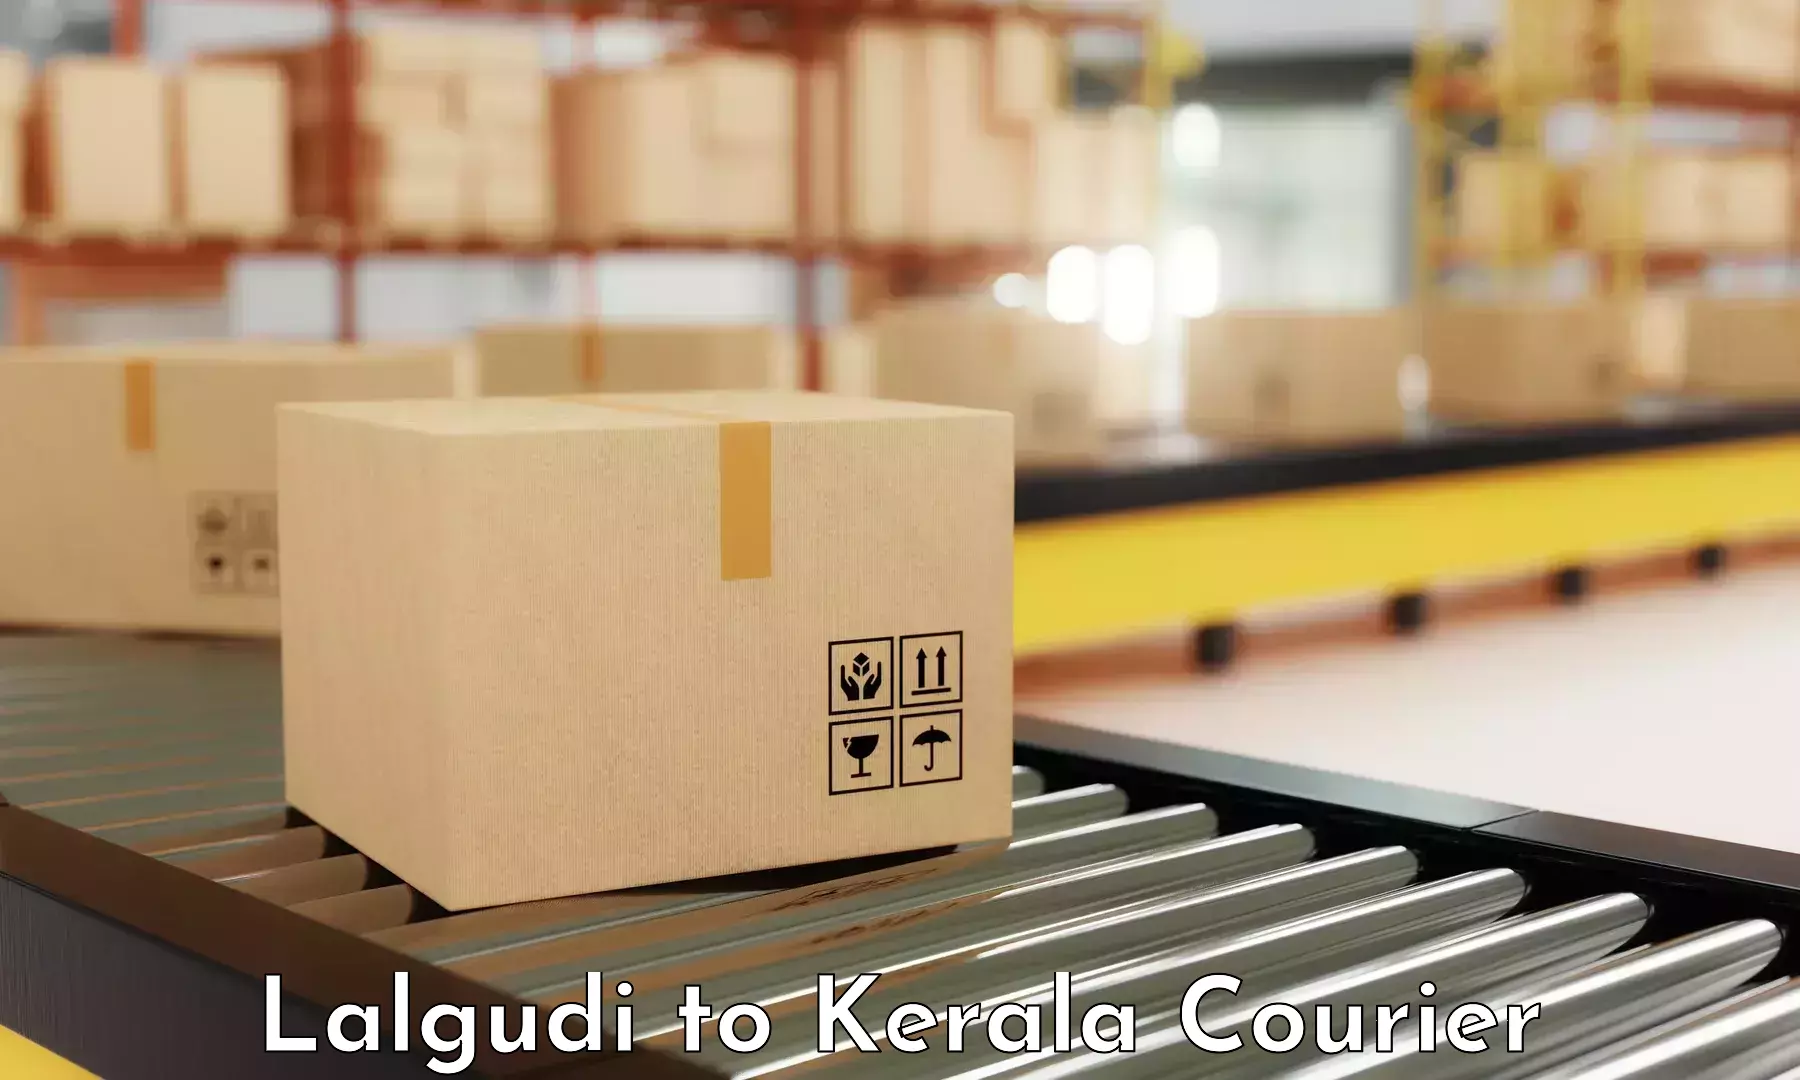 Efficient parcel tracking Lalgudi to Cochin University of Science and Technology